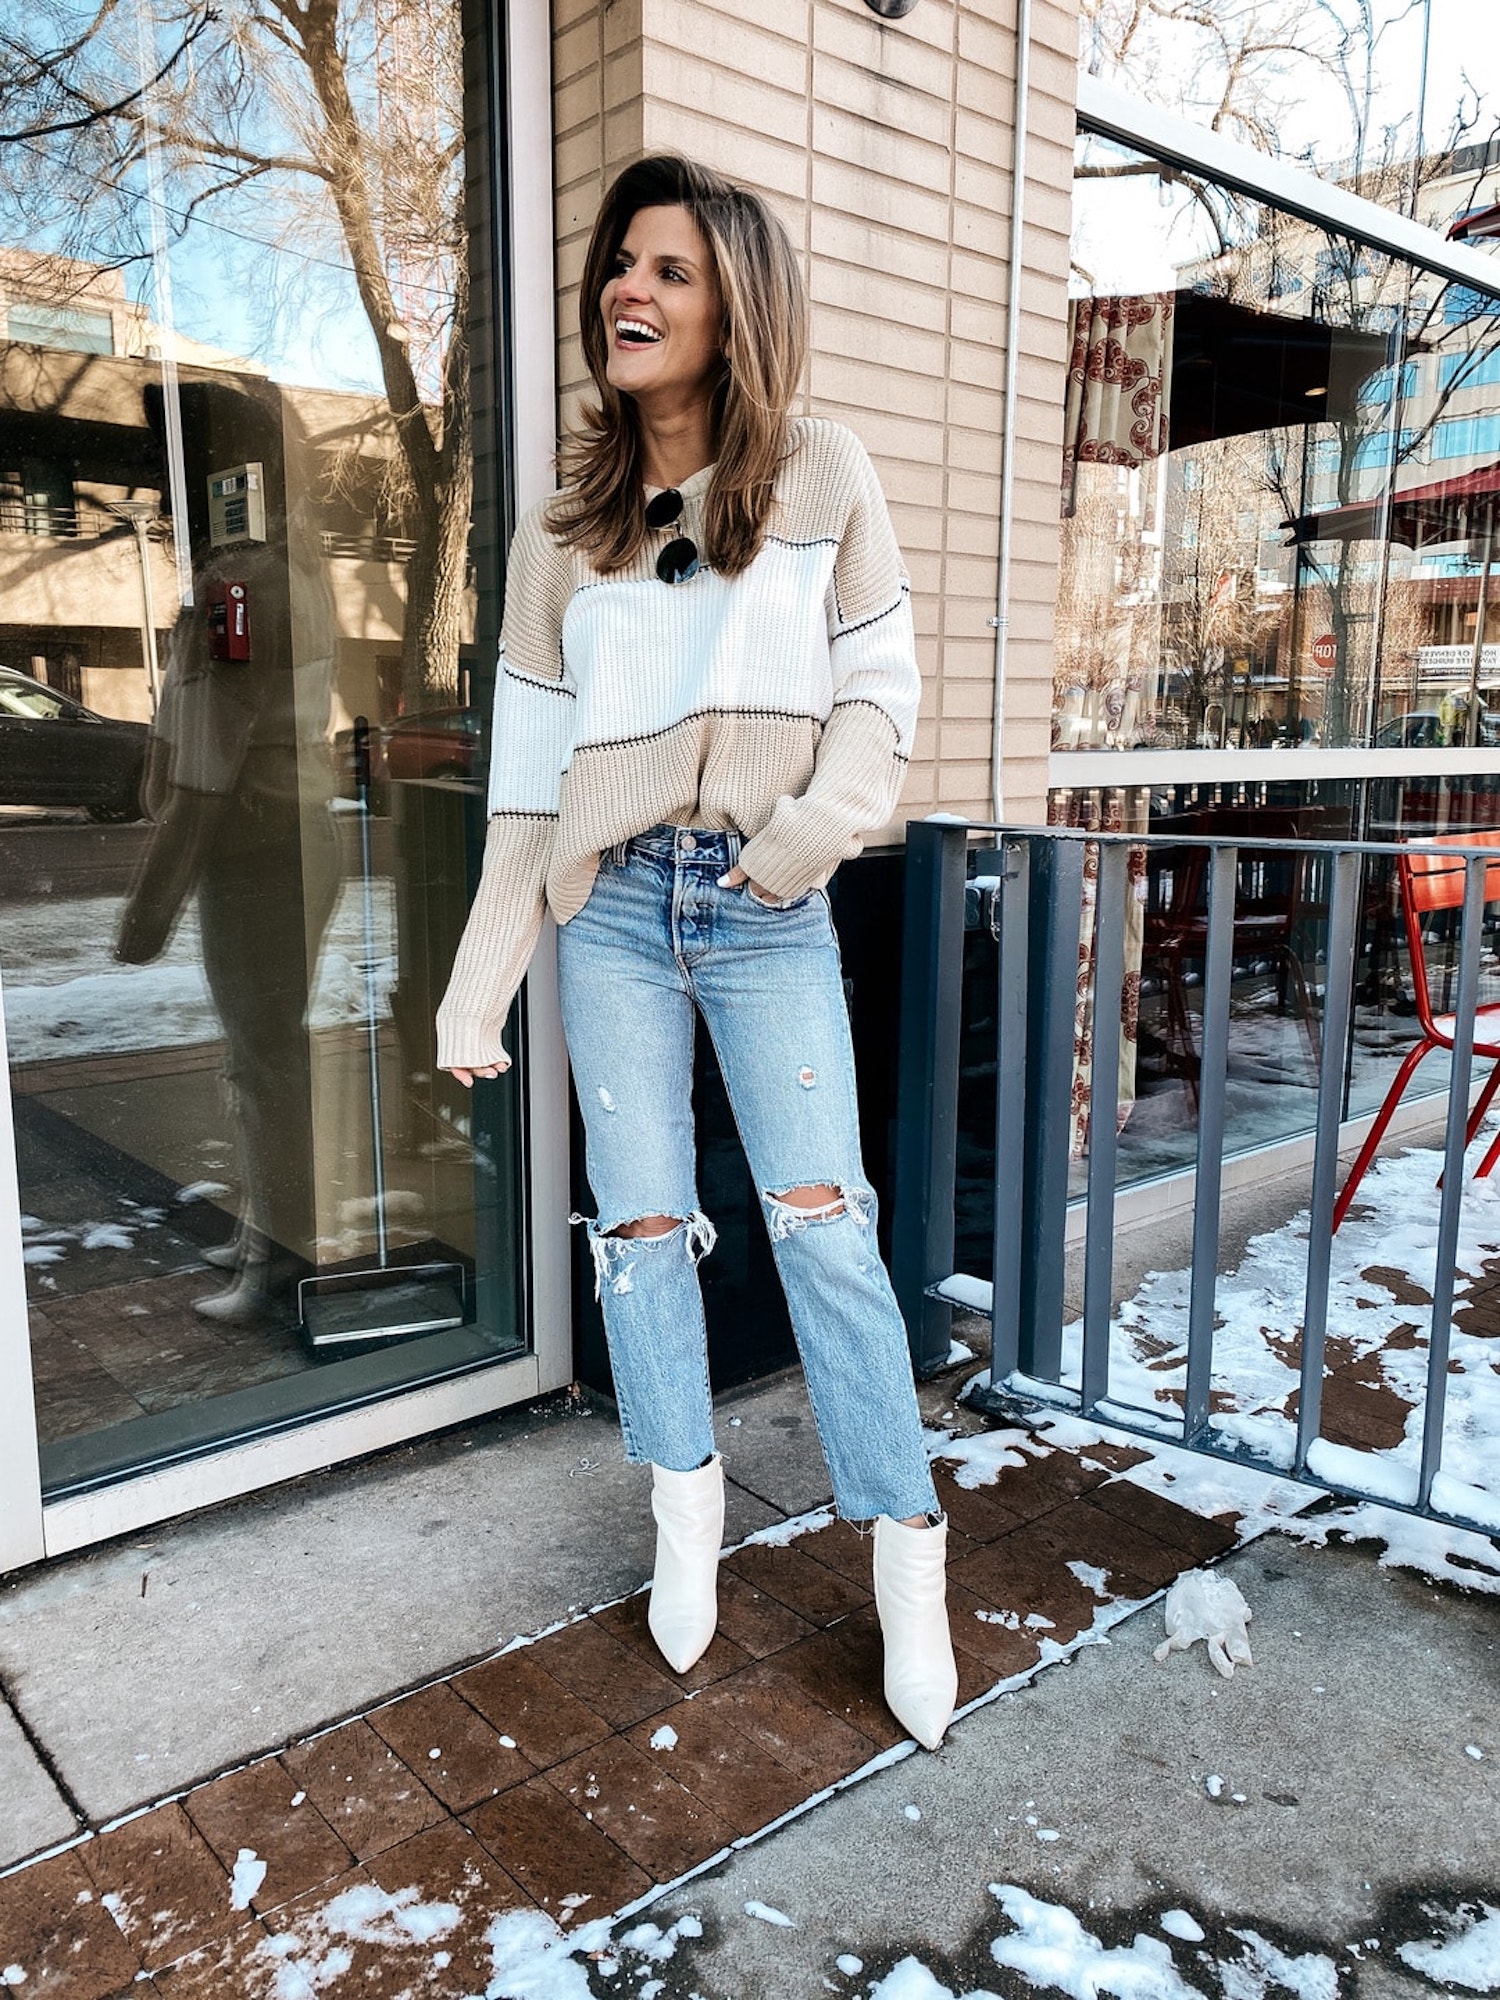 Brighton Keller wearing striped sweater, light wash ripped jeans and white booties